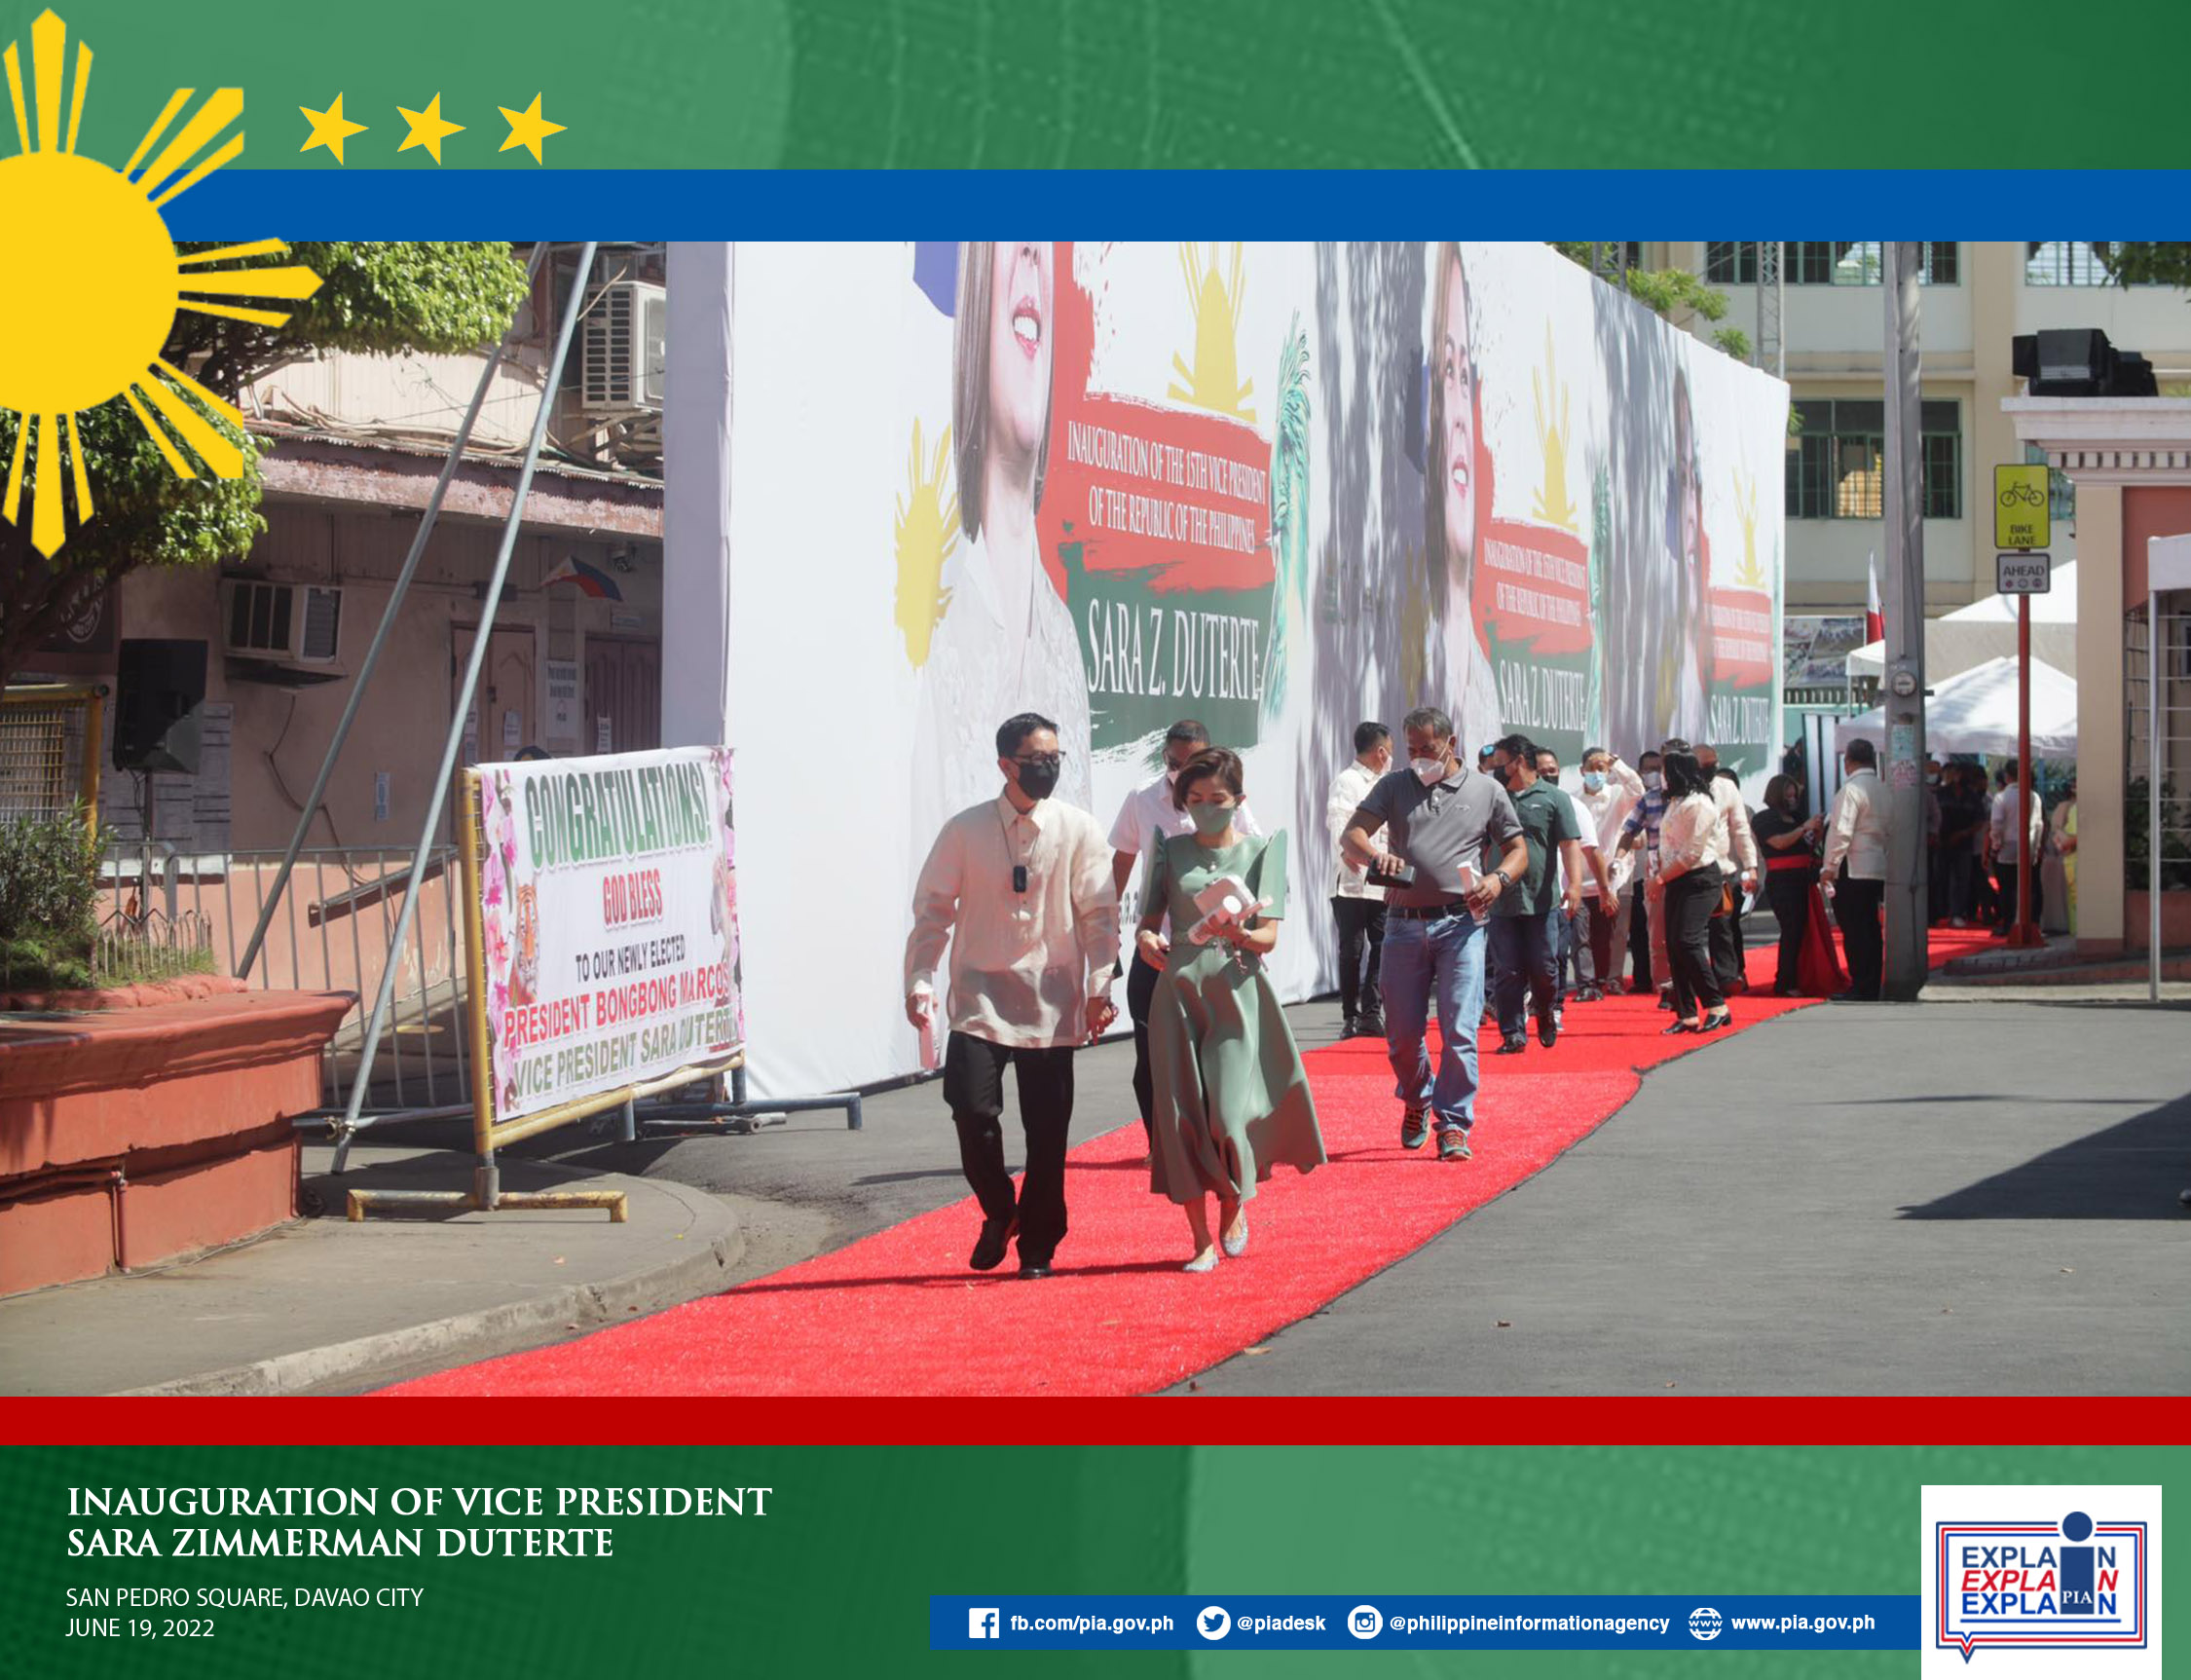 VIPs arriving at the venue of the Inauguration of Vice-President elect Sara Duterte